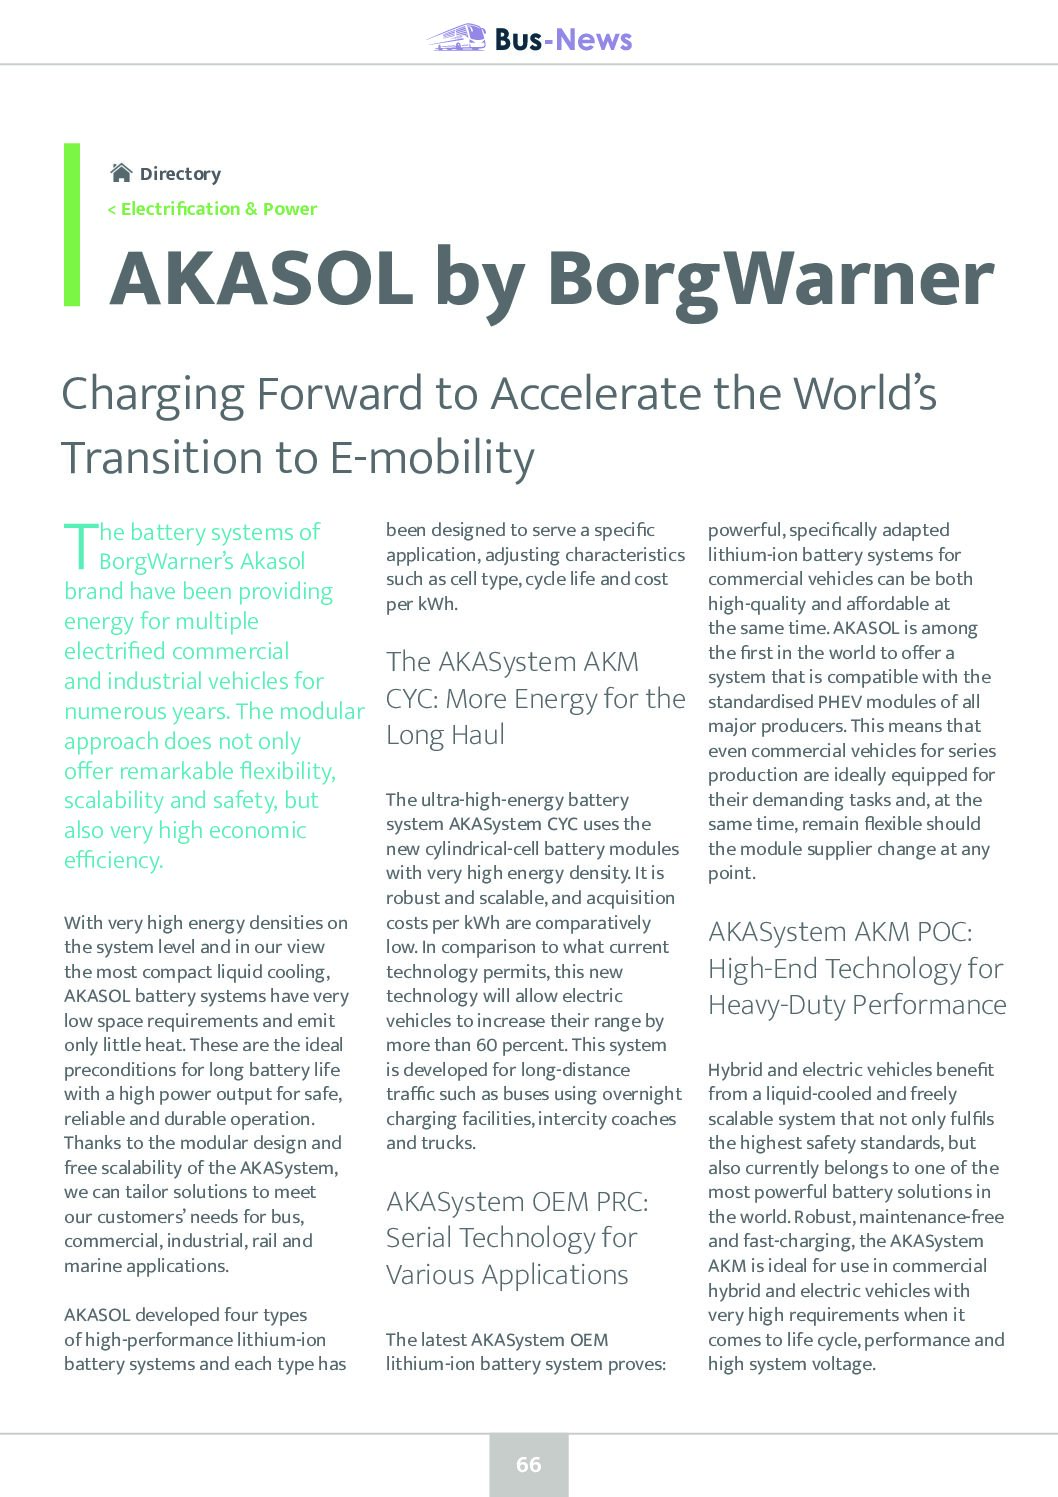 Charging Forward to Accelerate the World’s Transition to E-mobility